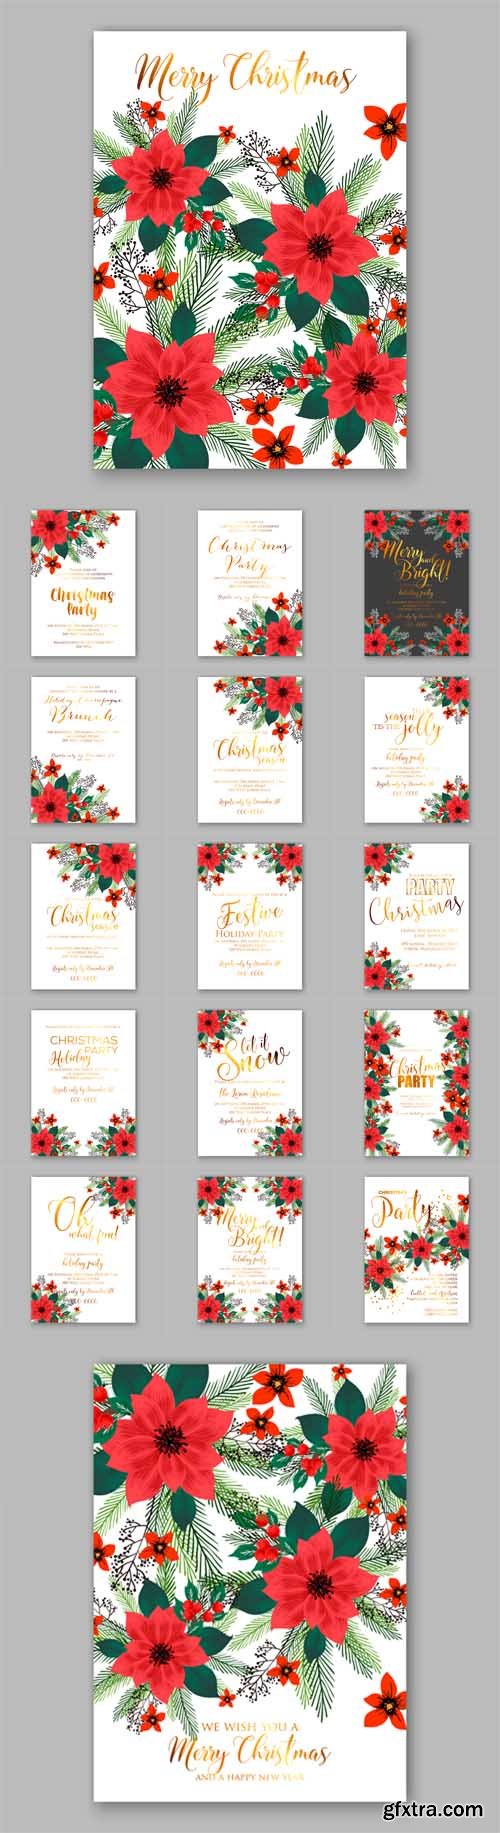 Vector Set - Merry Christmas Party Invitations with Winter Wreath